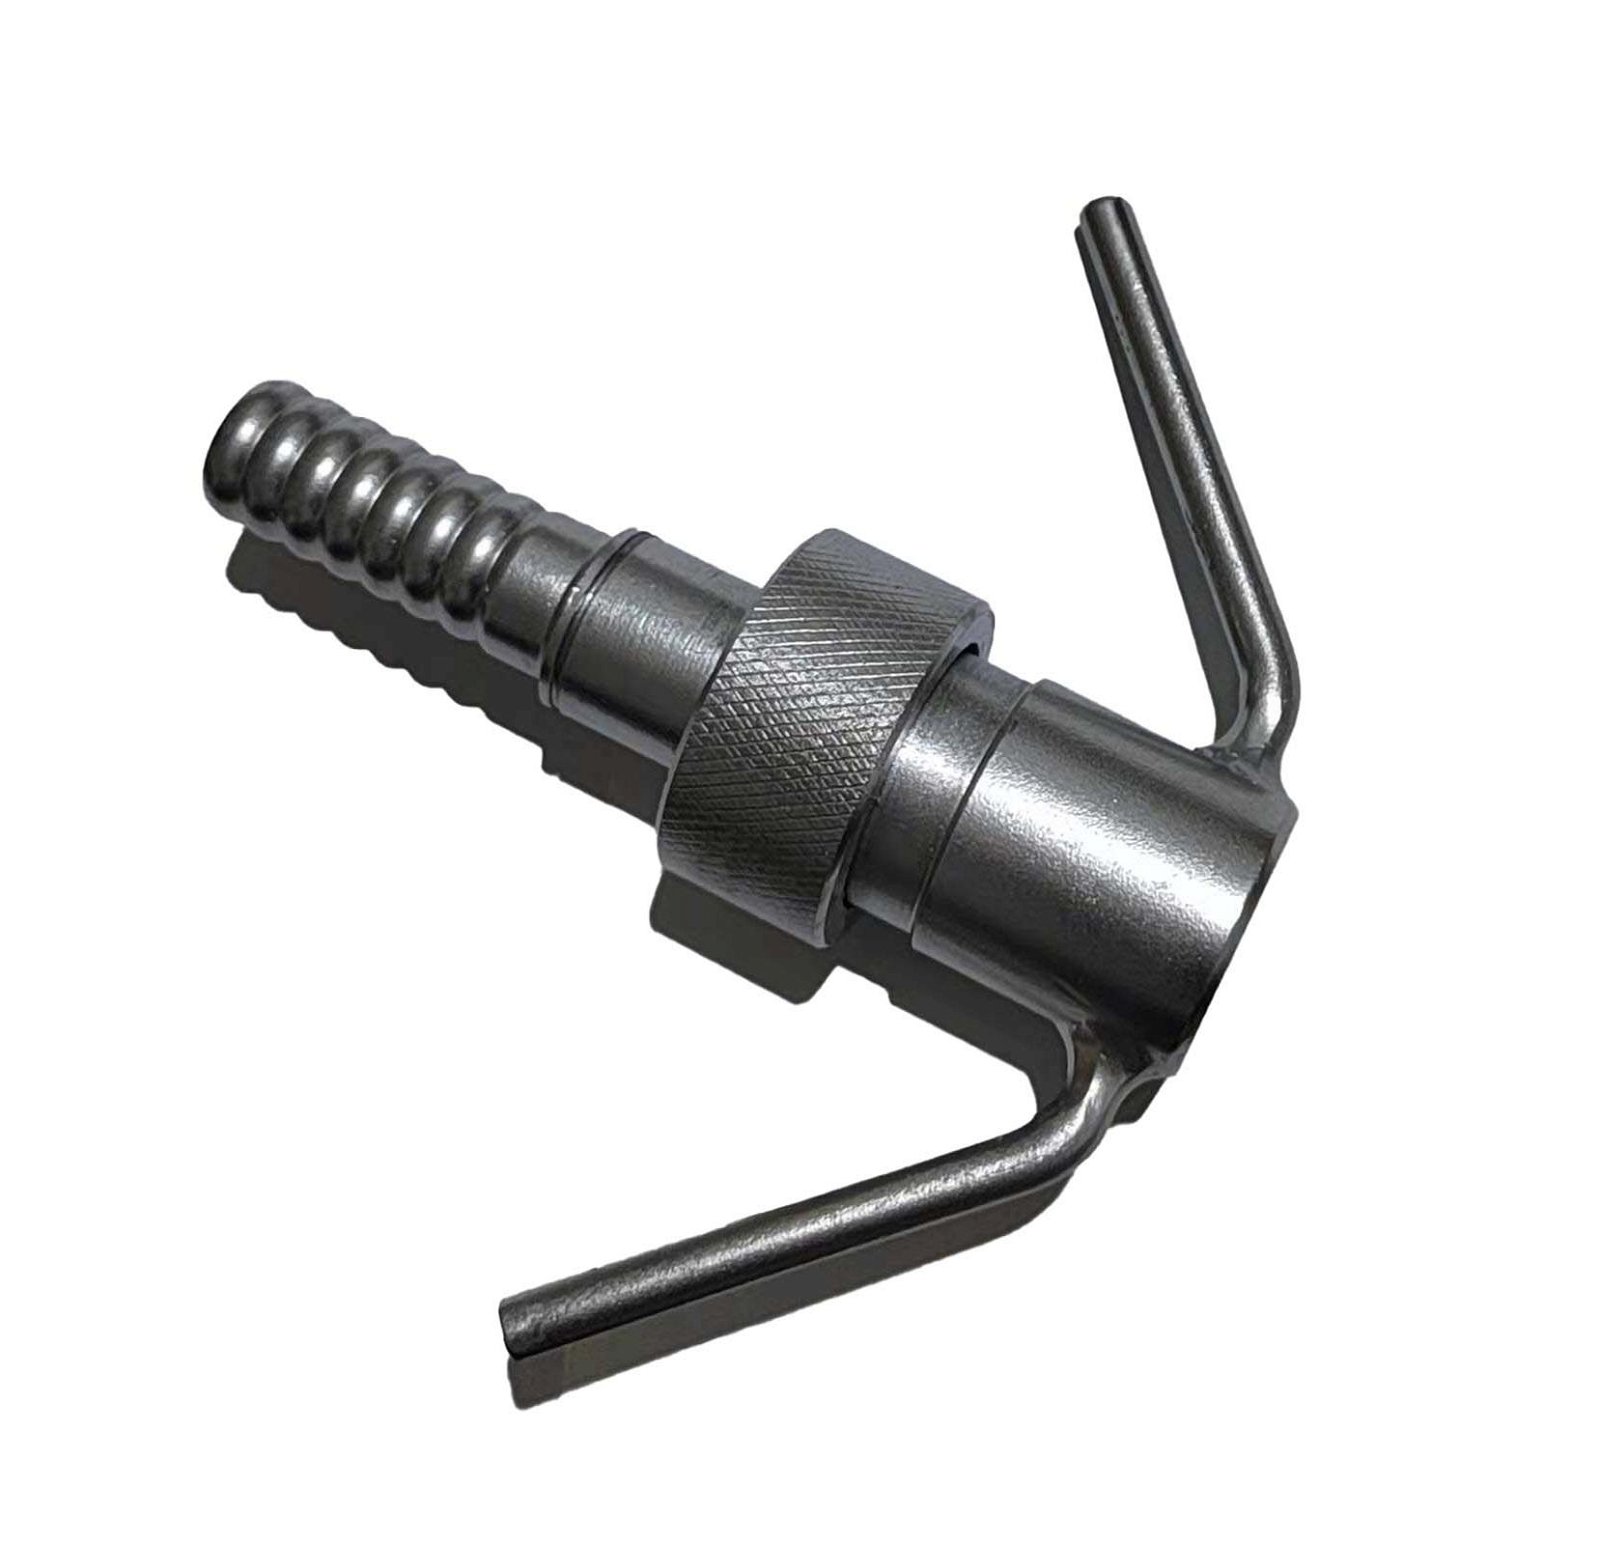 Jet Grouting Connectors Joint to Hollow Bolt Ground Underground Construction